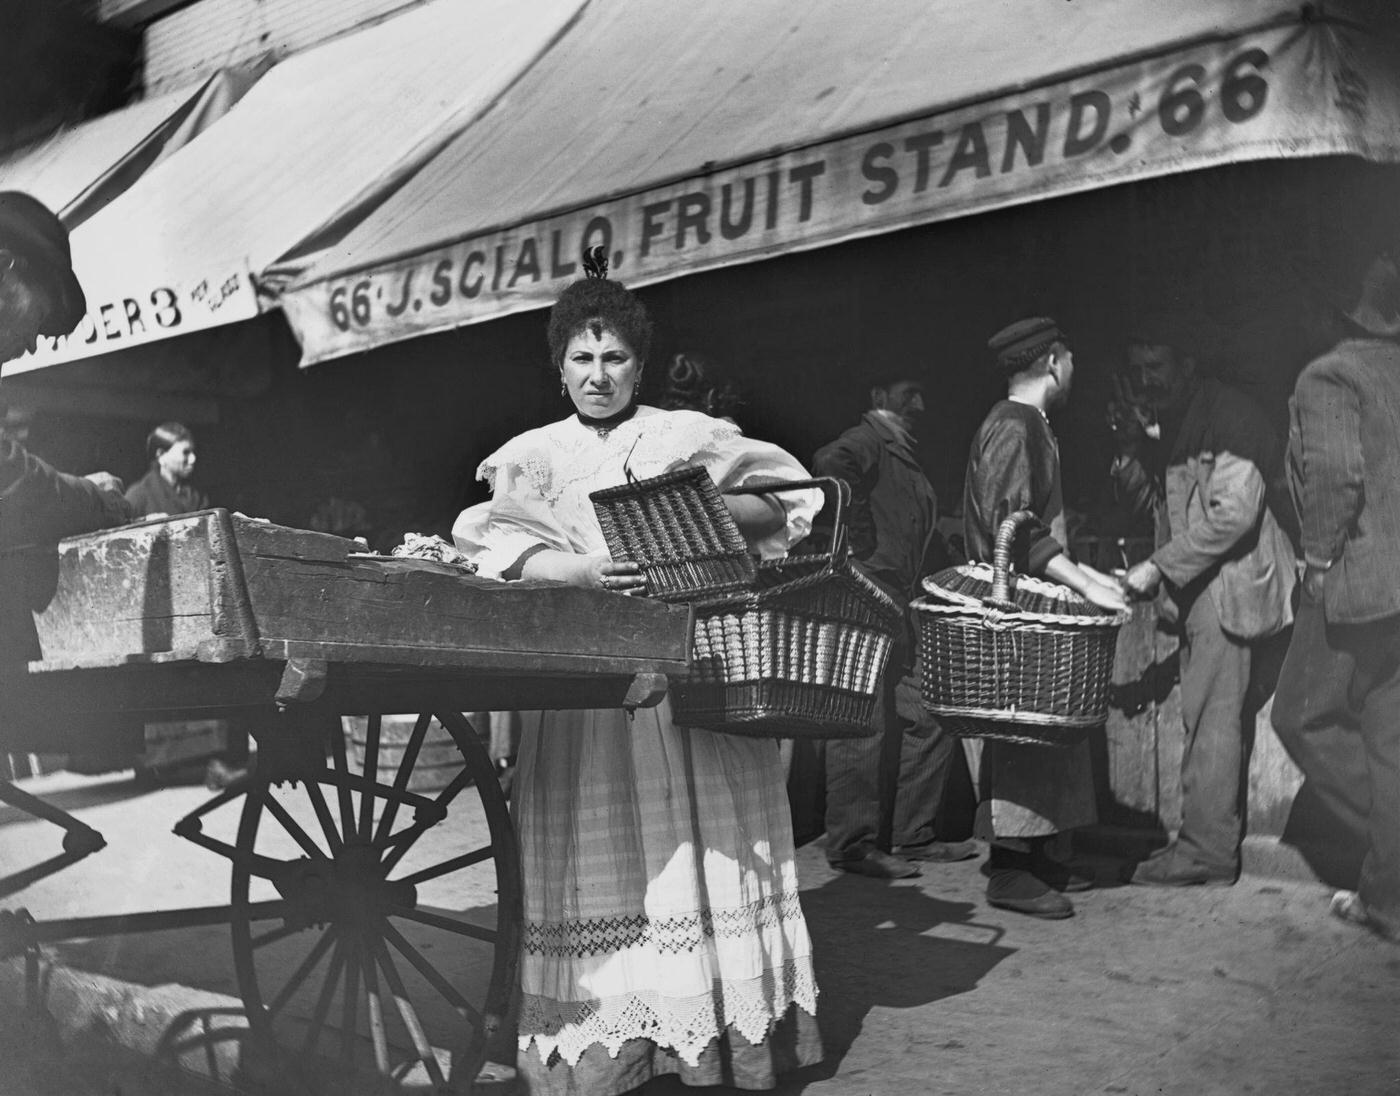 Woman Holding A Large Wicker Basket Buying From A Pushcart Vendor On Mulberry Street, New York City, 1897